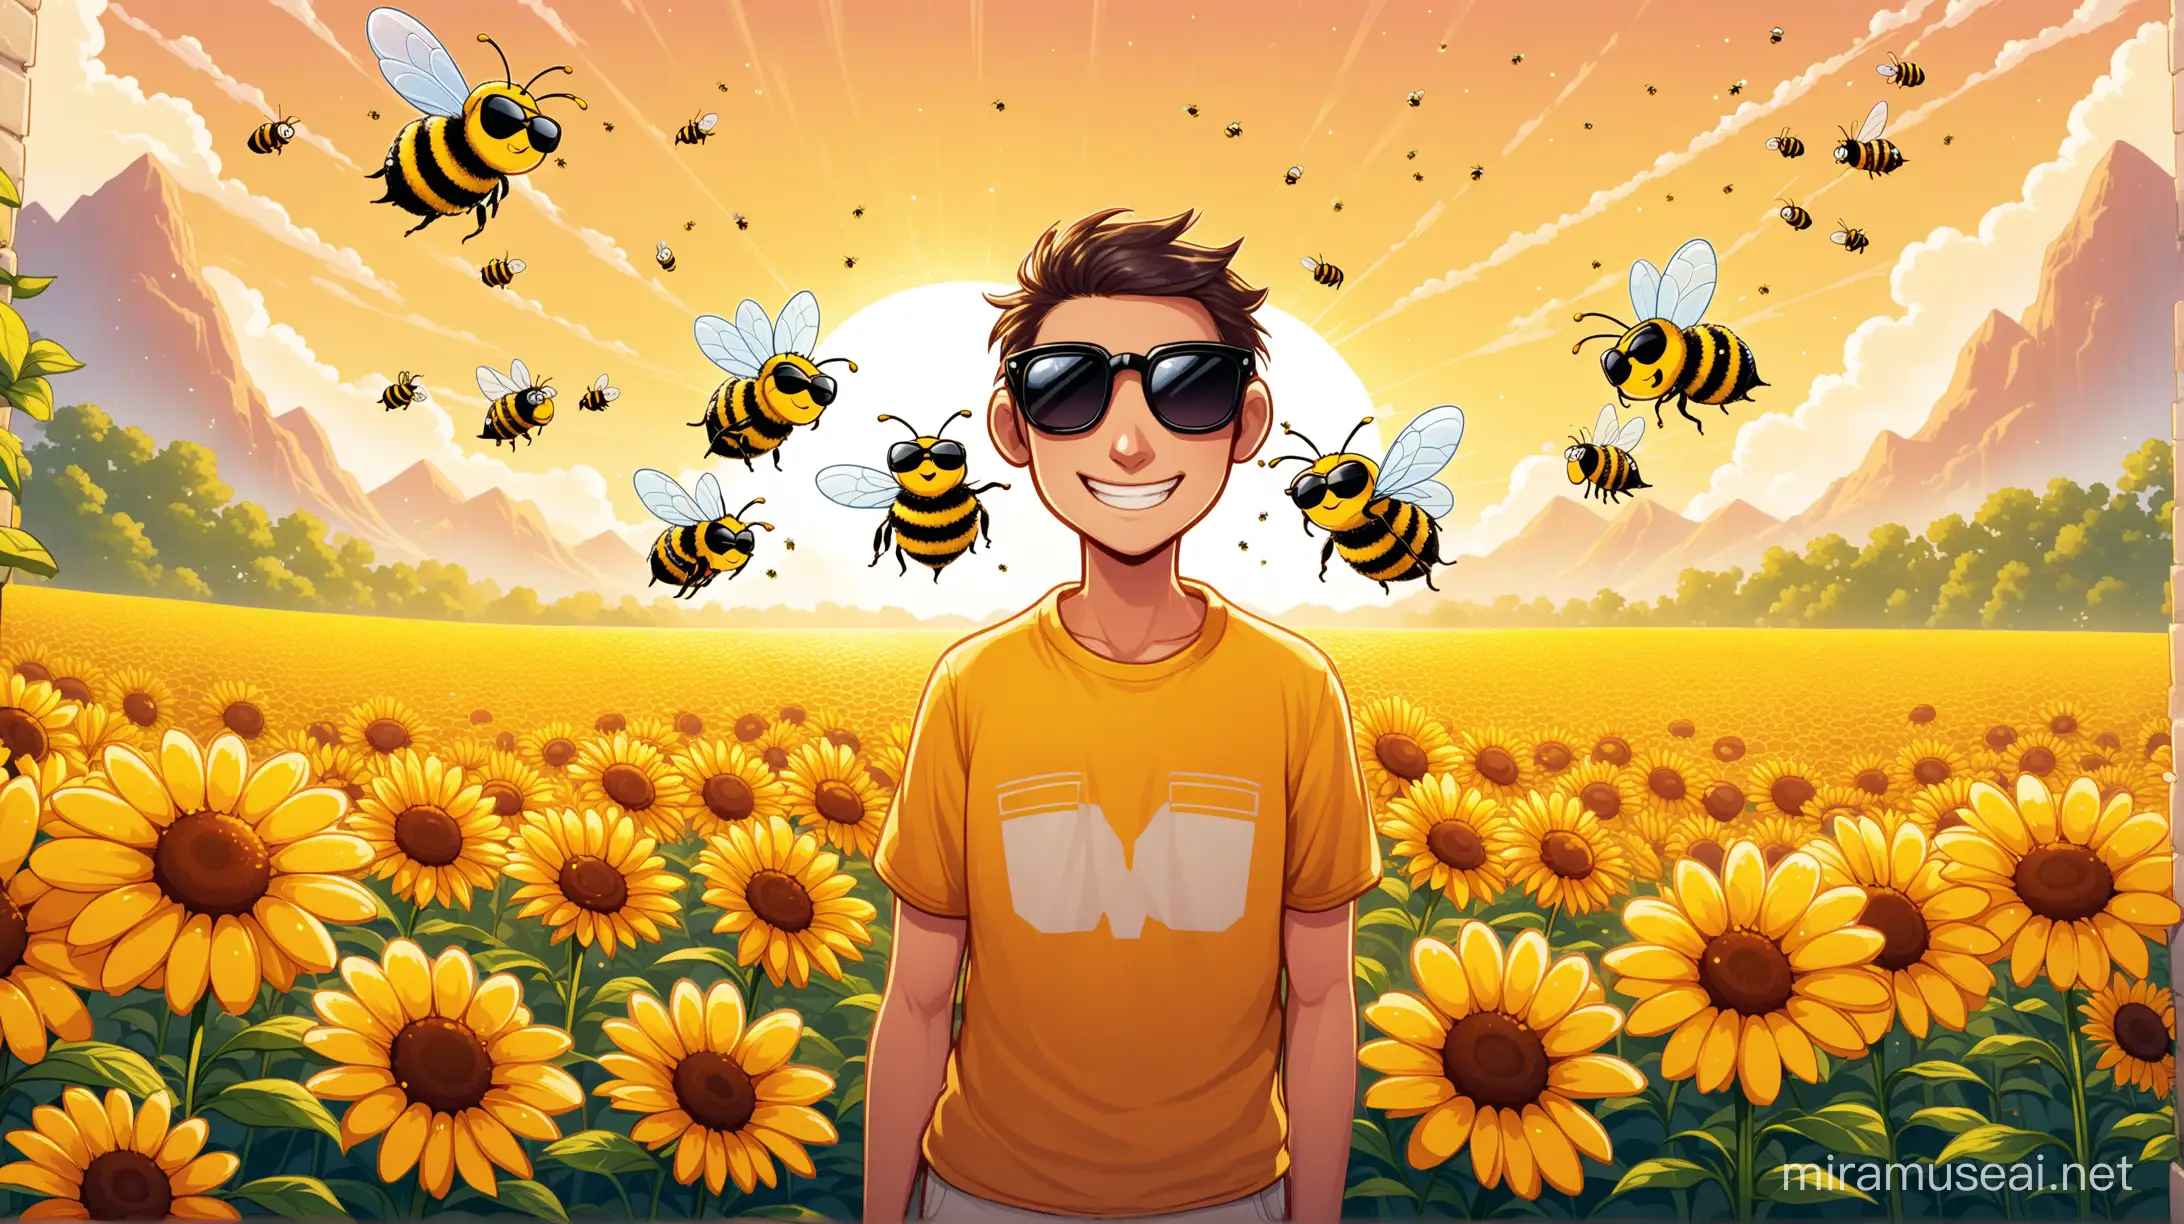 Colorful Cartoon Bees in Sunglasses Greeting Newcomer